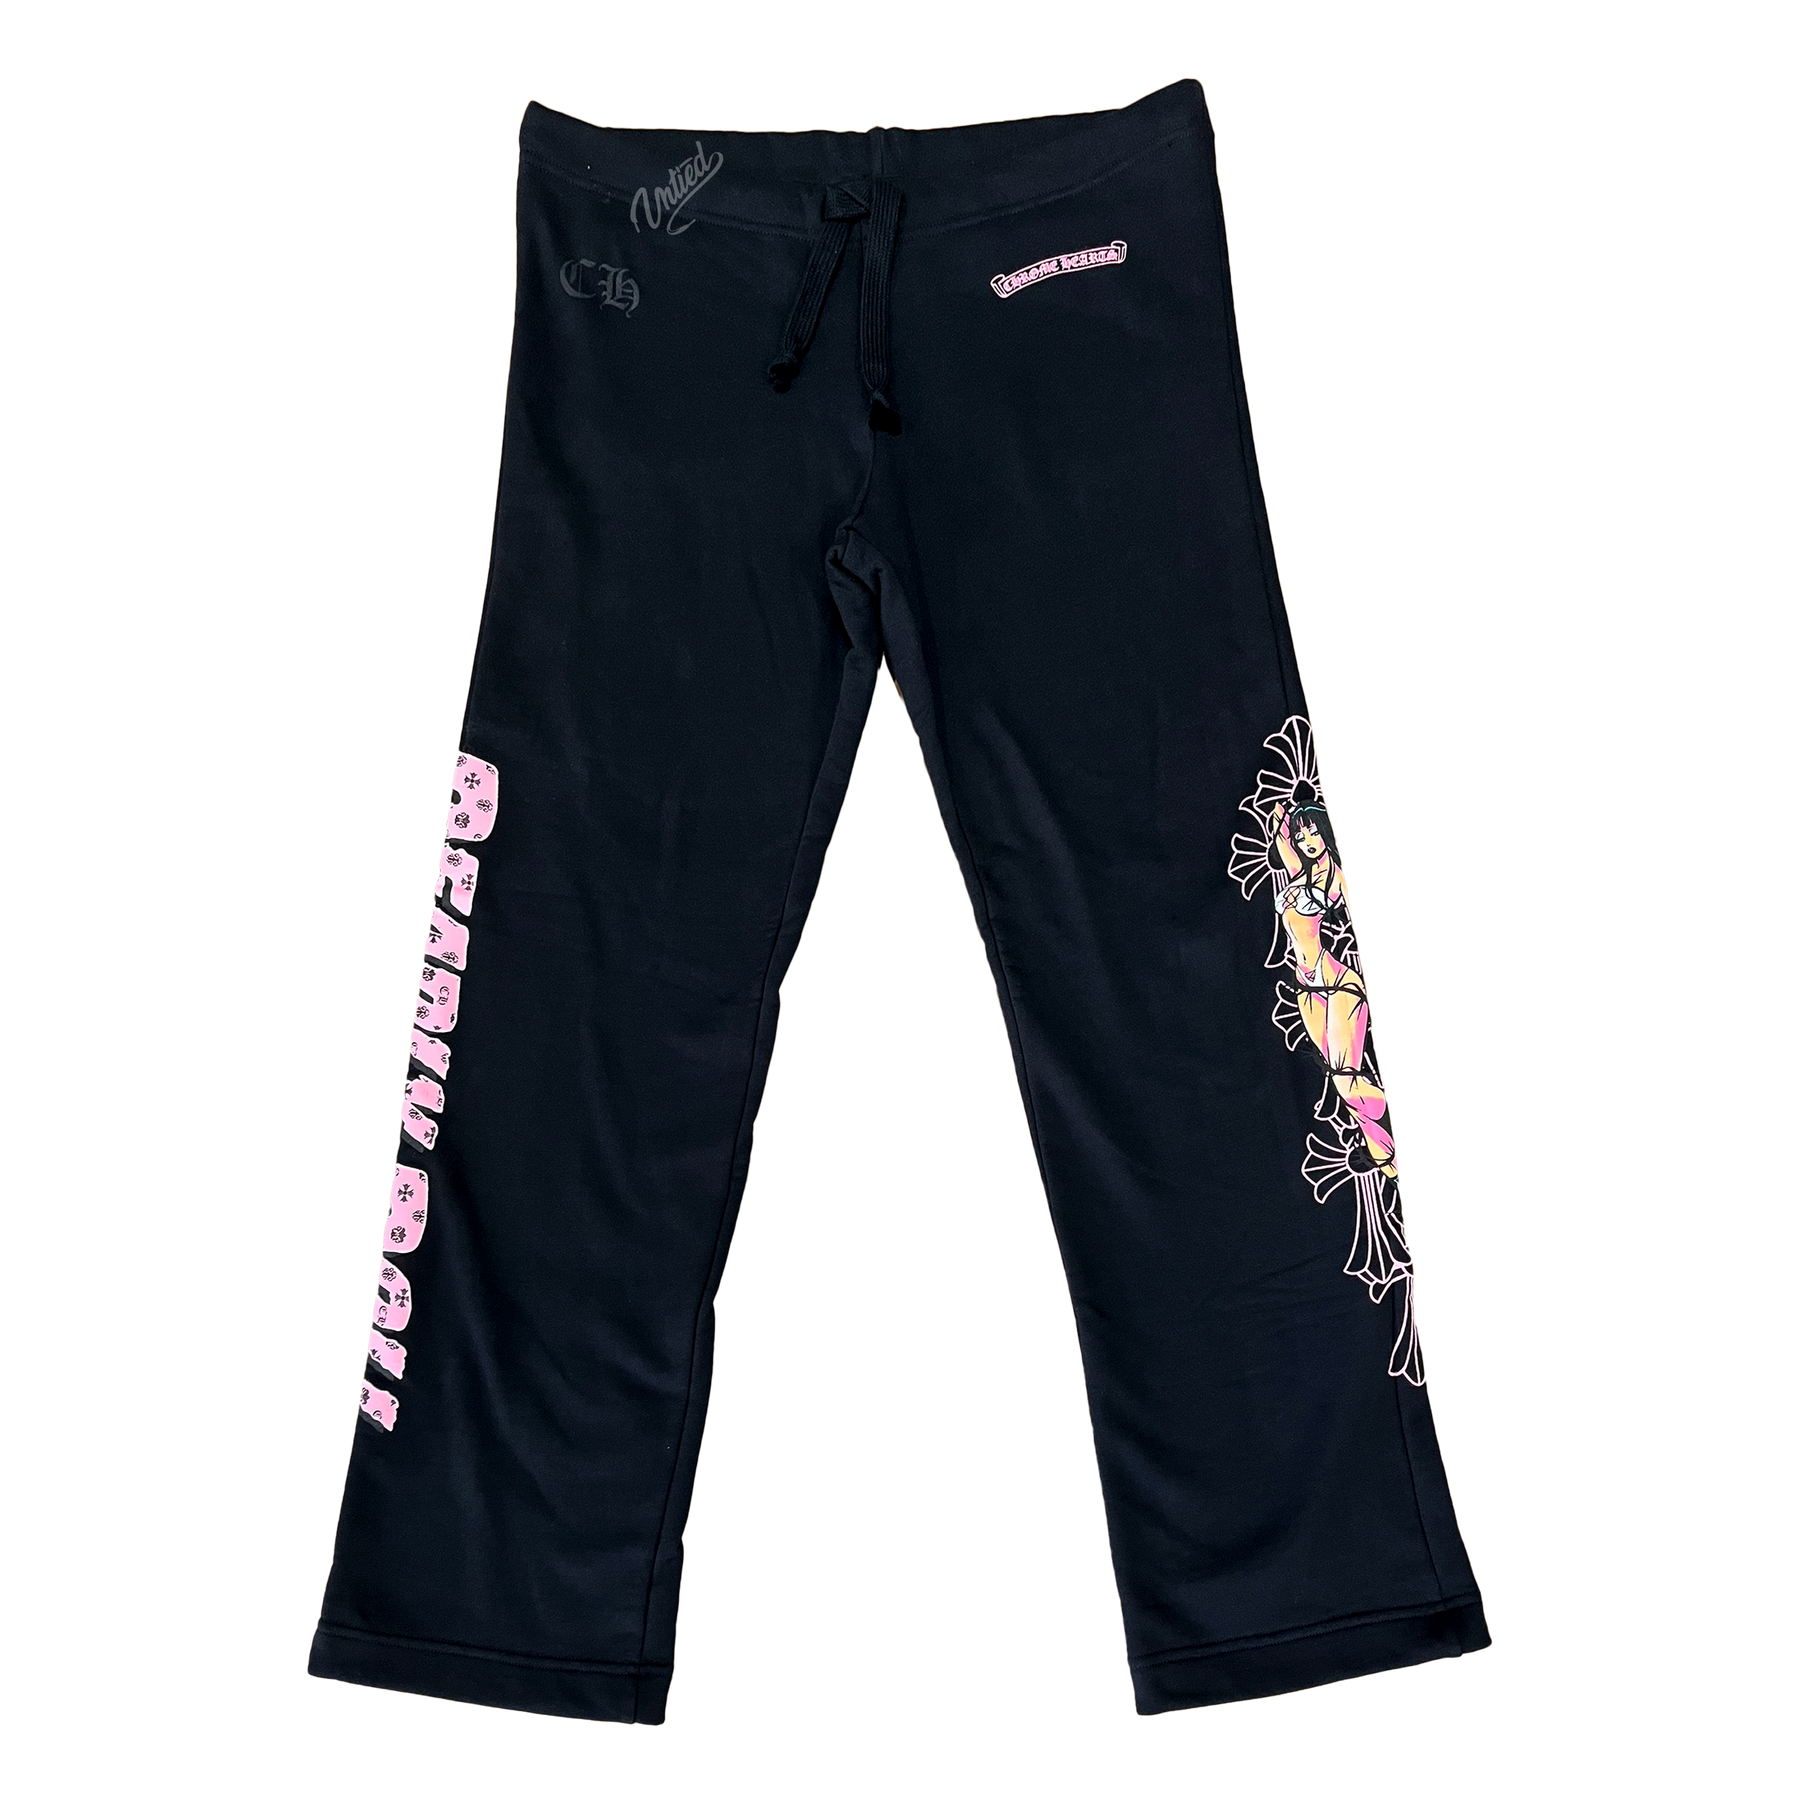 Chrome Hearts Deadly Doll Sweatpants "Black/Pink"